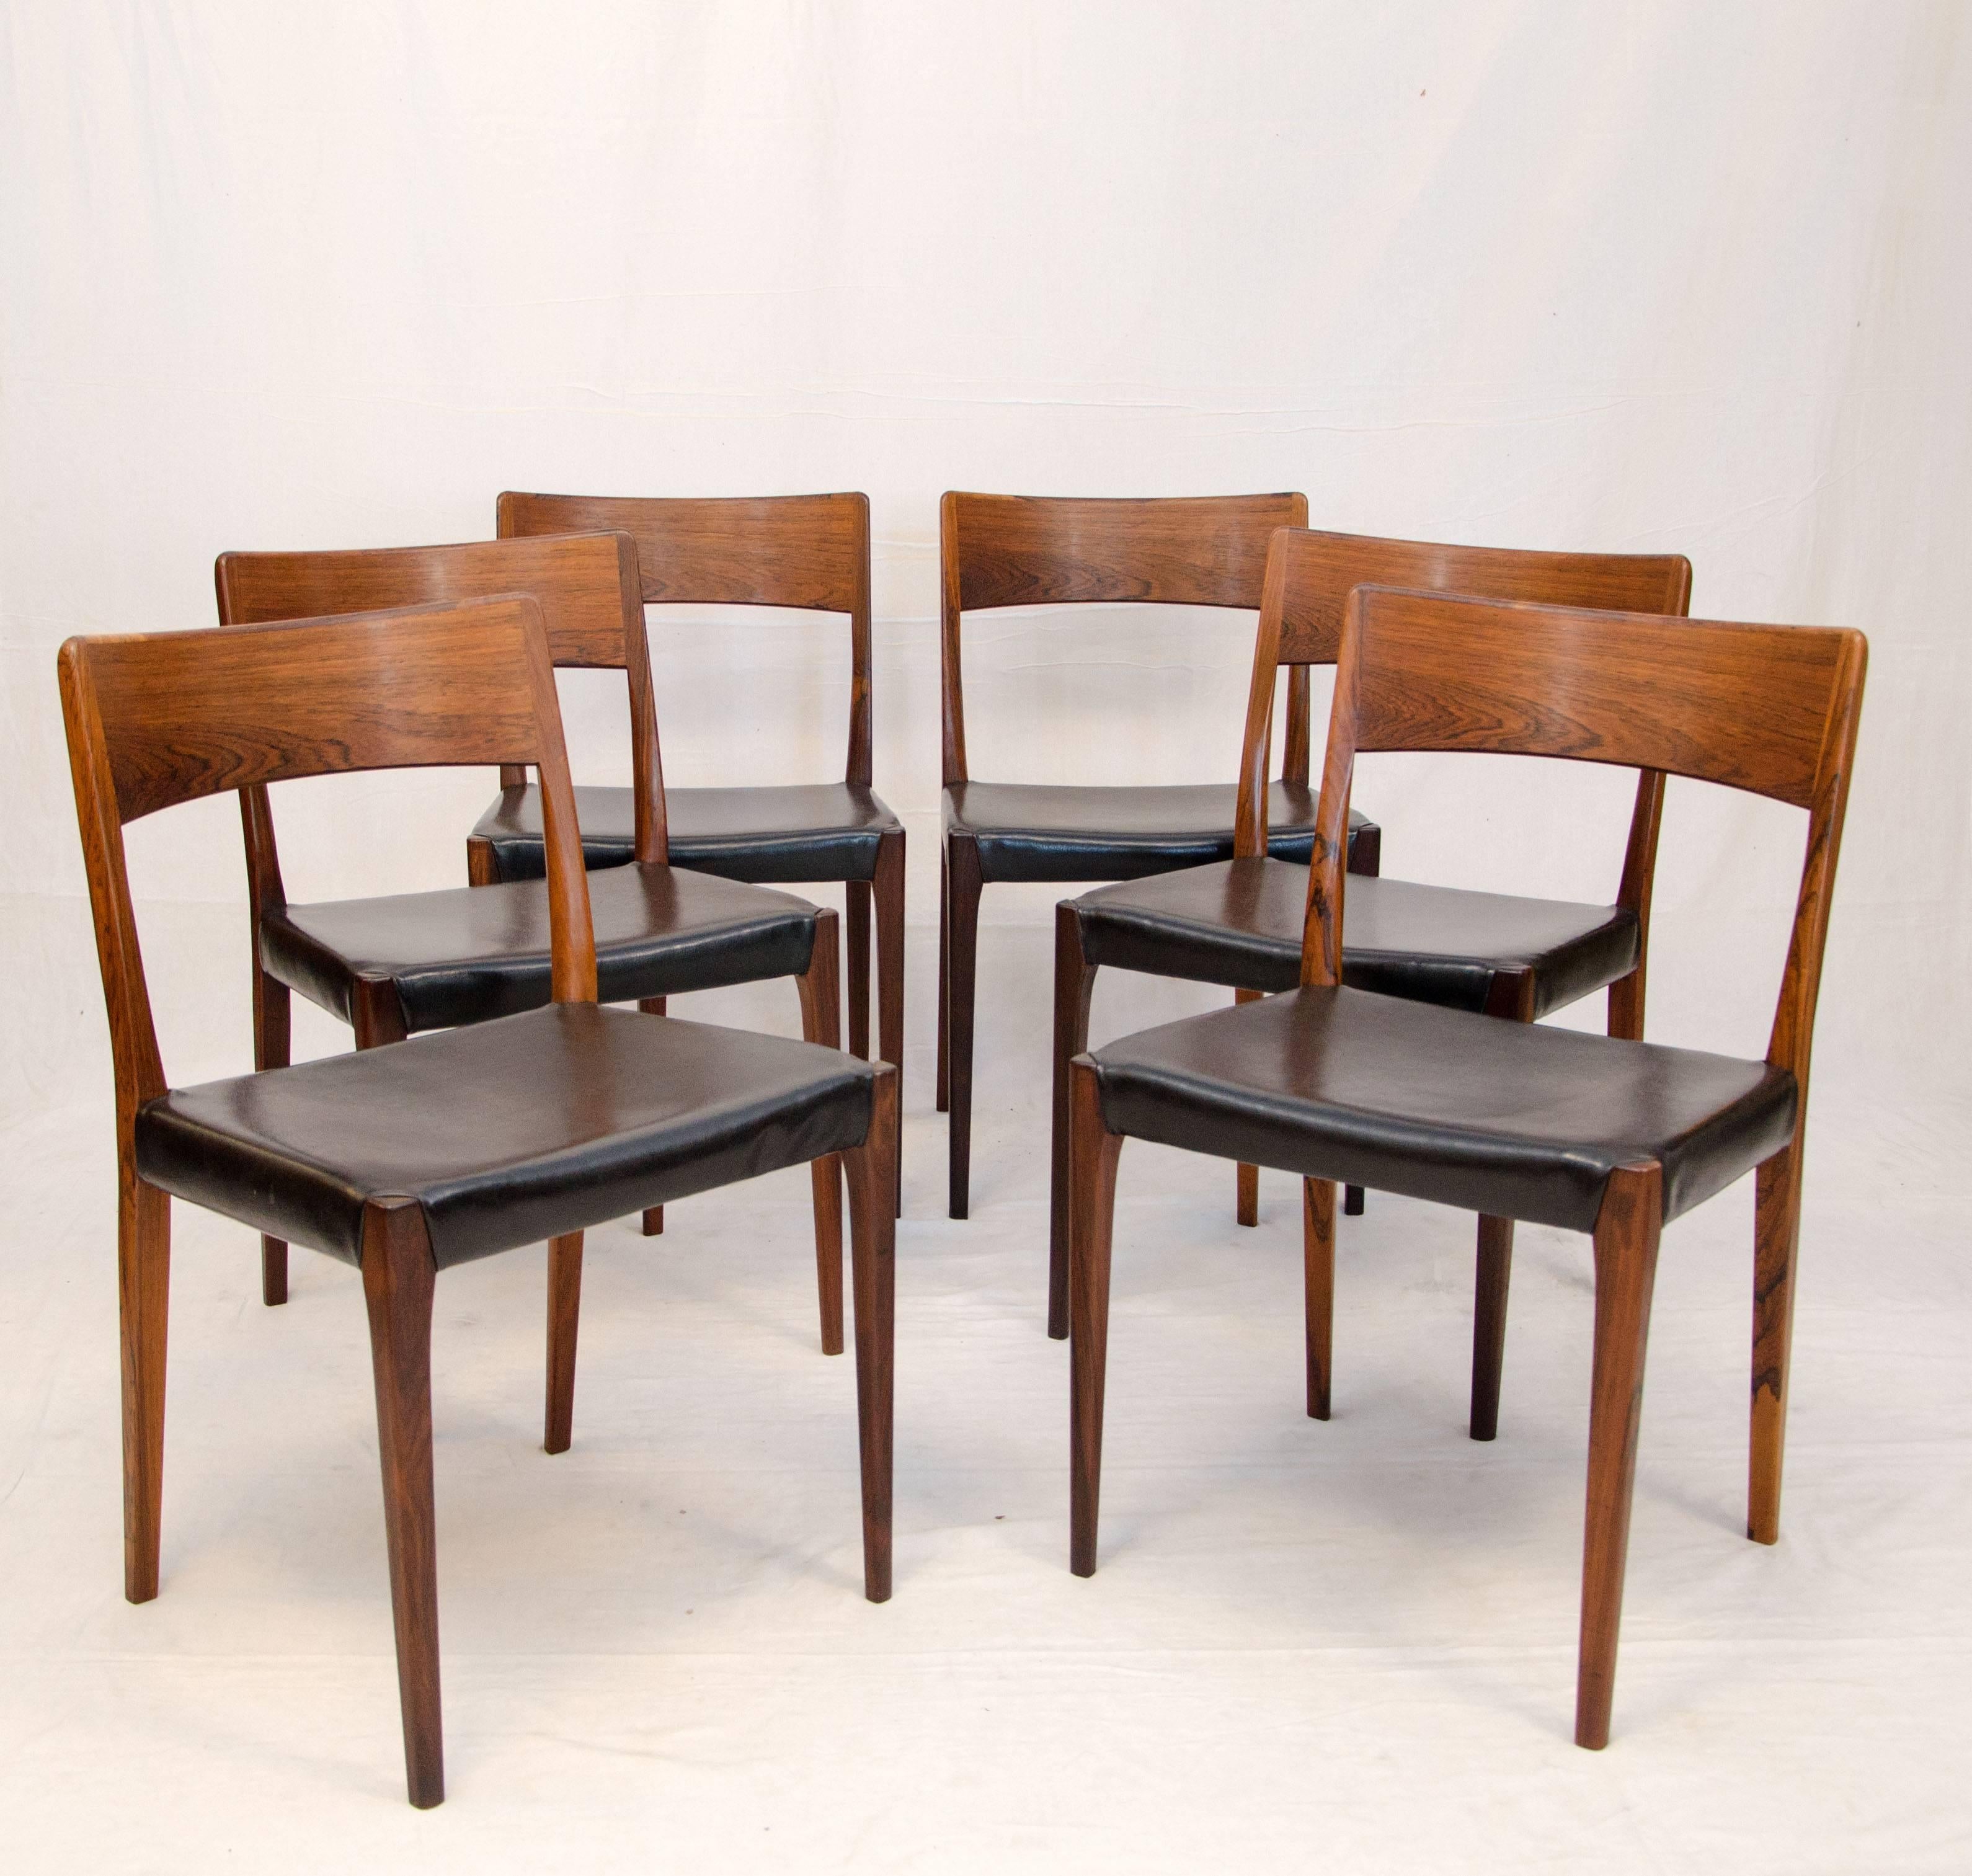 Very nice set of six dining chairs in rosewood, all original finish and upholstery, very well maintained by previous owners. Marked "Hornslet Møbelfabrik" on each chair.